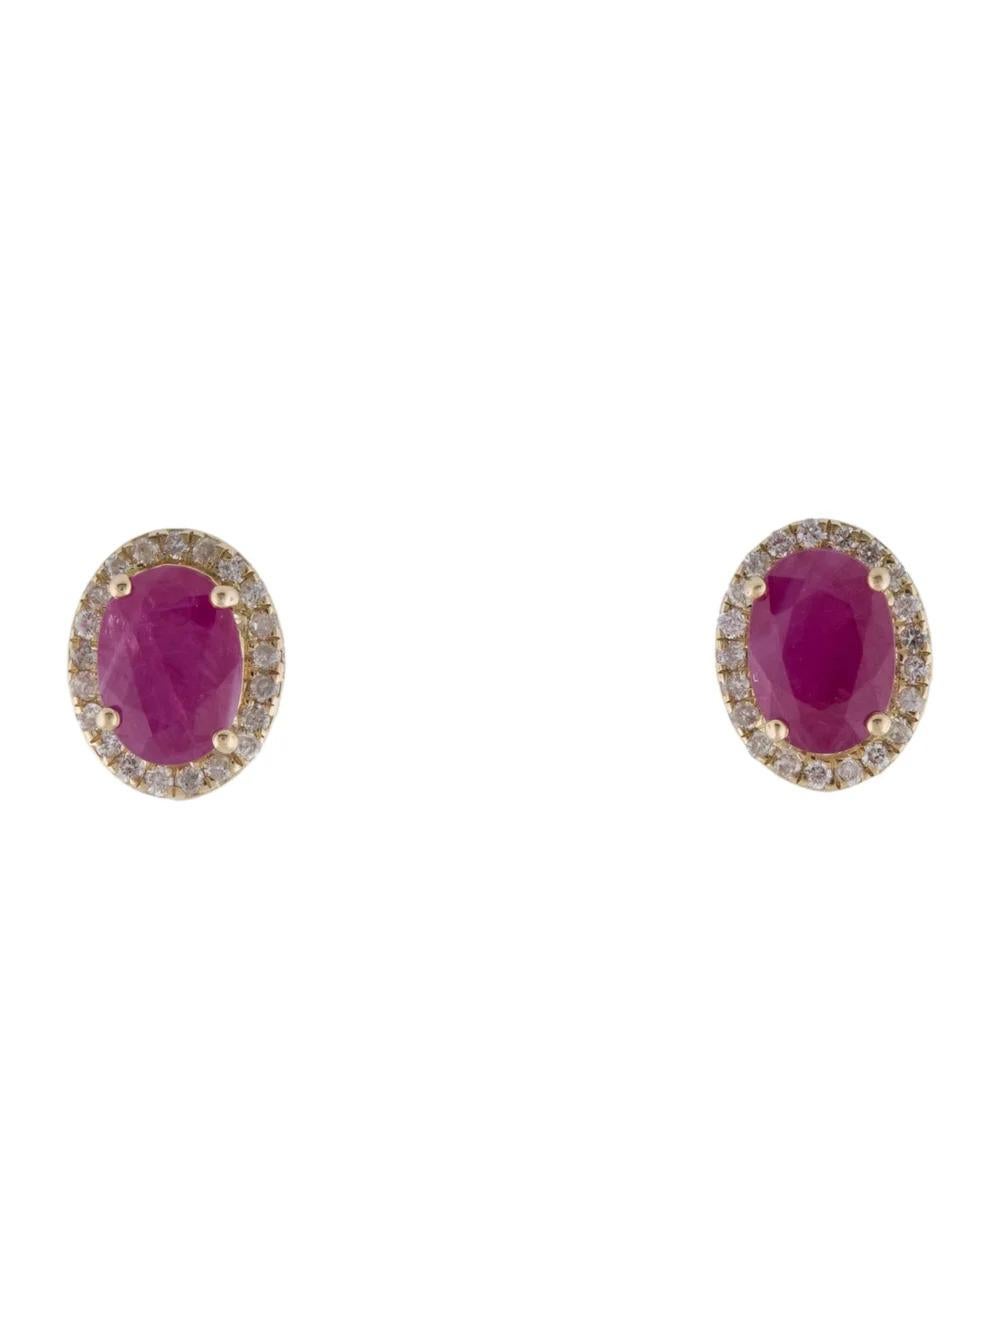 Experience timeless elegance with these exquisite 14K Yellow Gold Stud Earrings featuring captivating gemstones.

Specifications:

* Gemstone: Two faceted oval rubies totaling 2.31 carats
* Metal Type: Luxurious 14K yellow gold setting
* Total Item